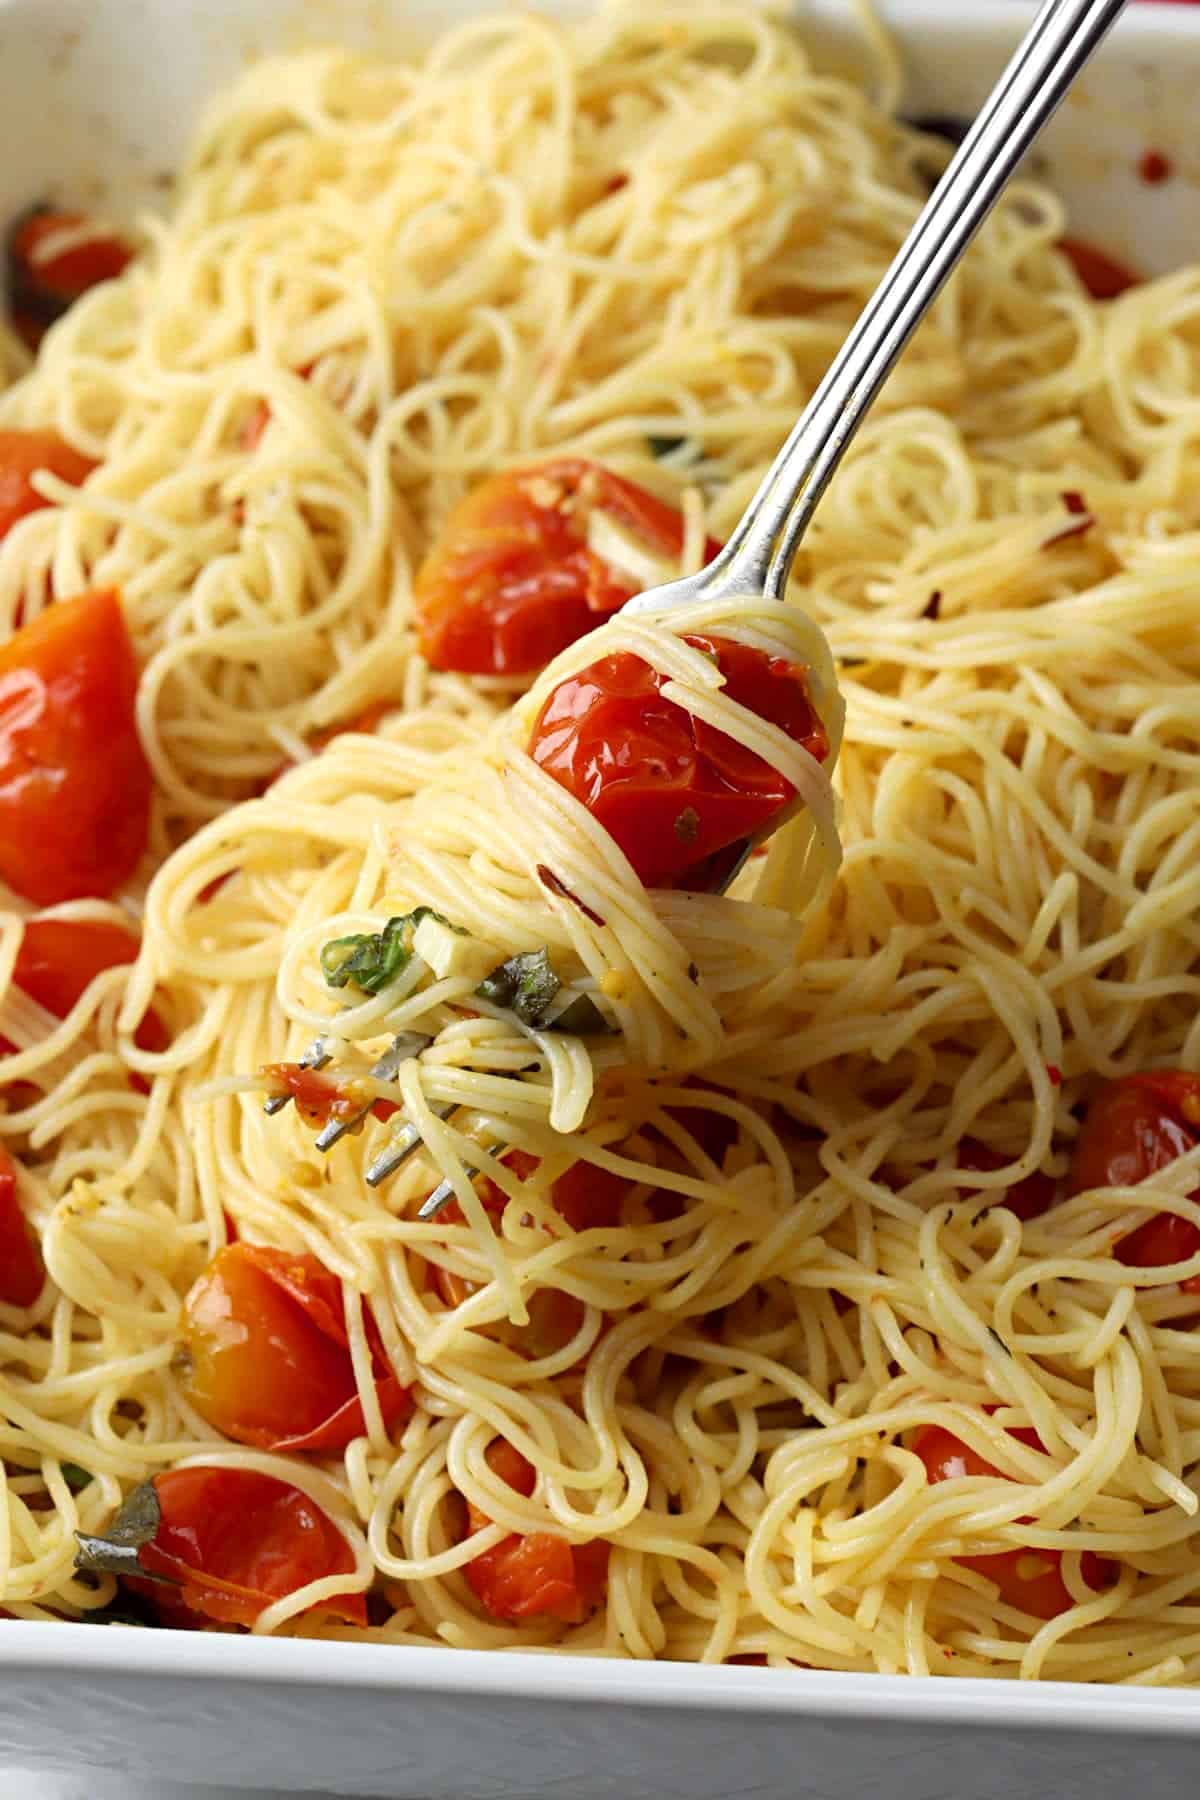 A fork filled with angel hair spaghetti, roasted tomatoes, and thin sliced garlic pieces.